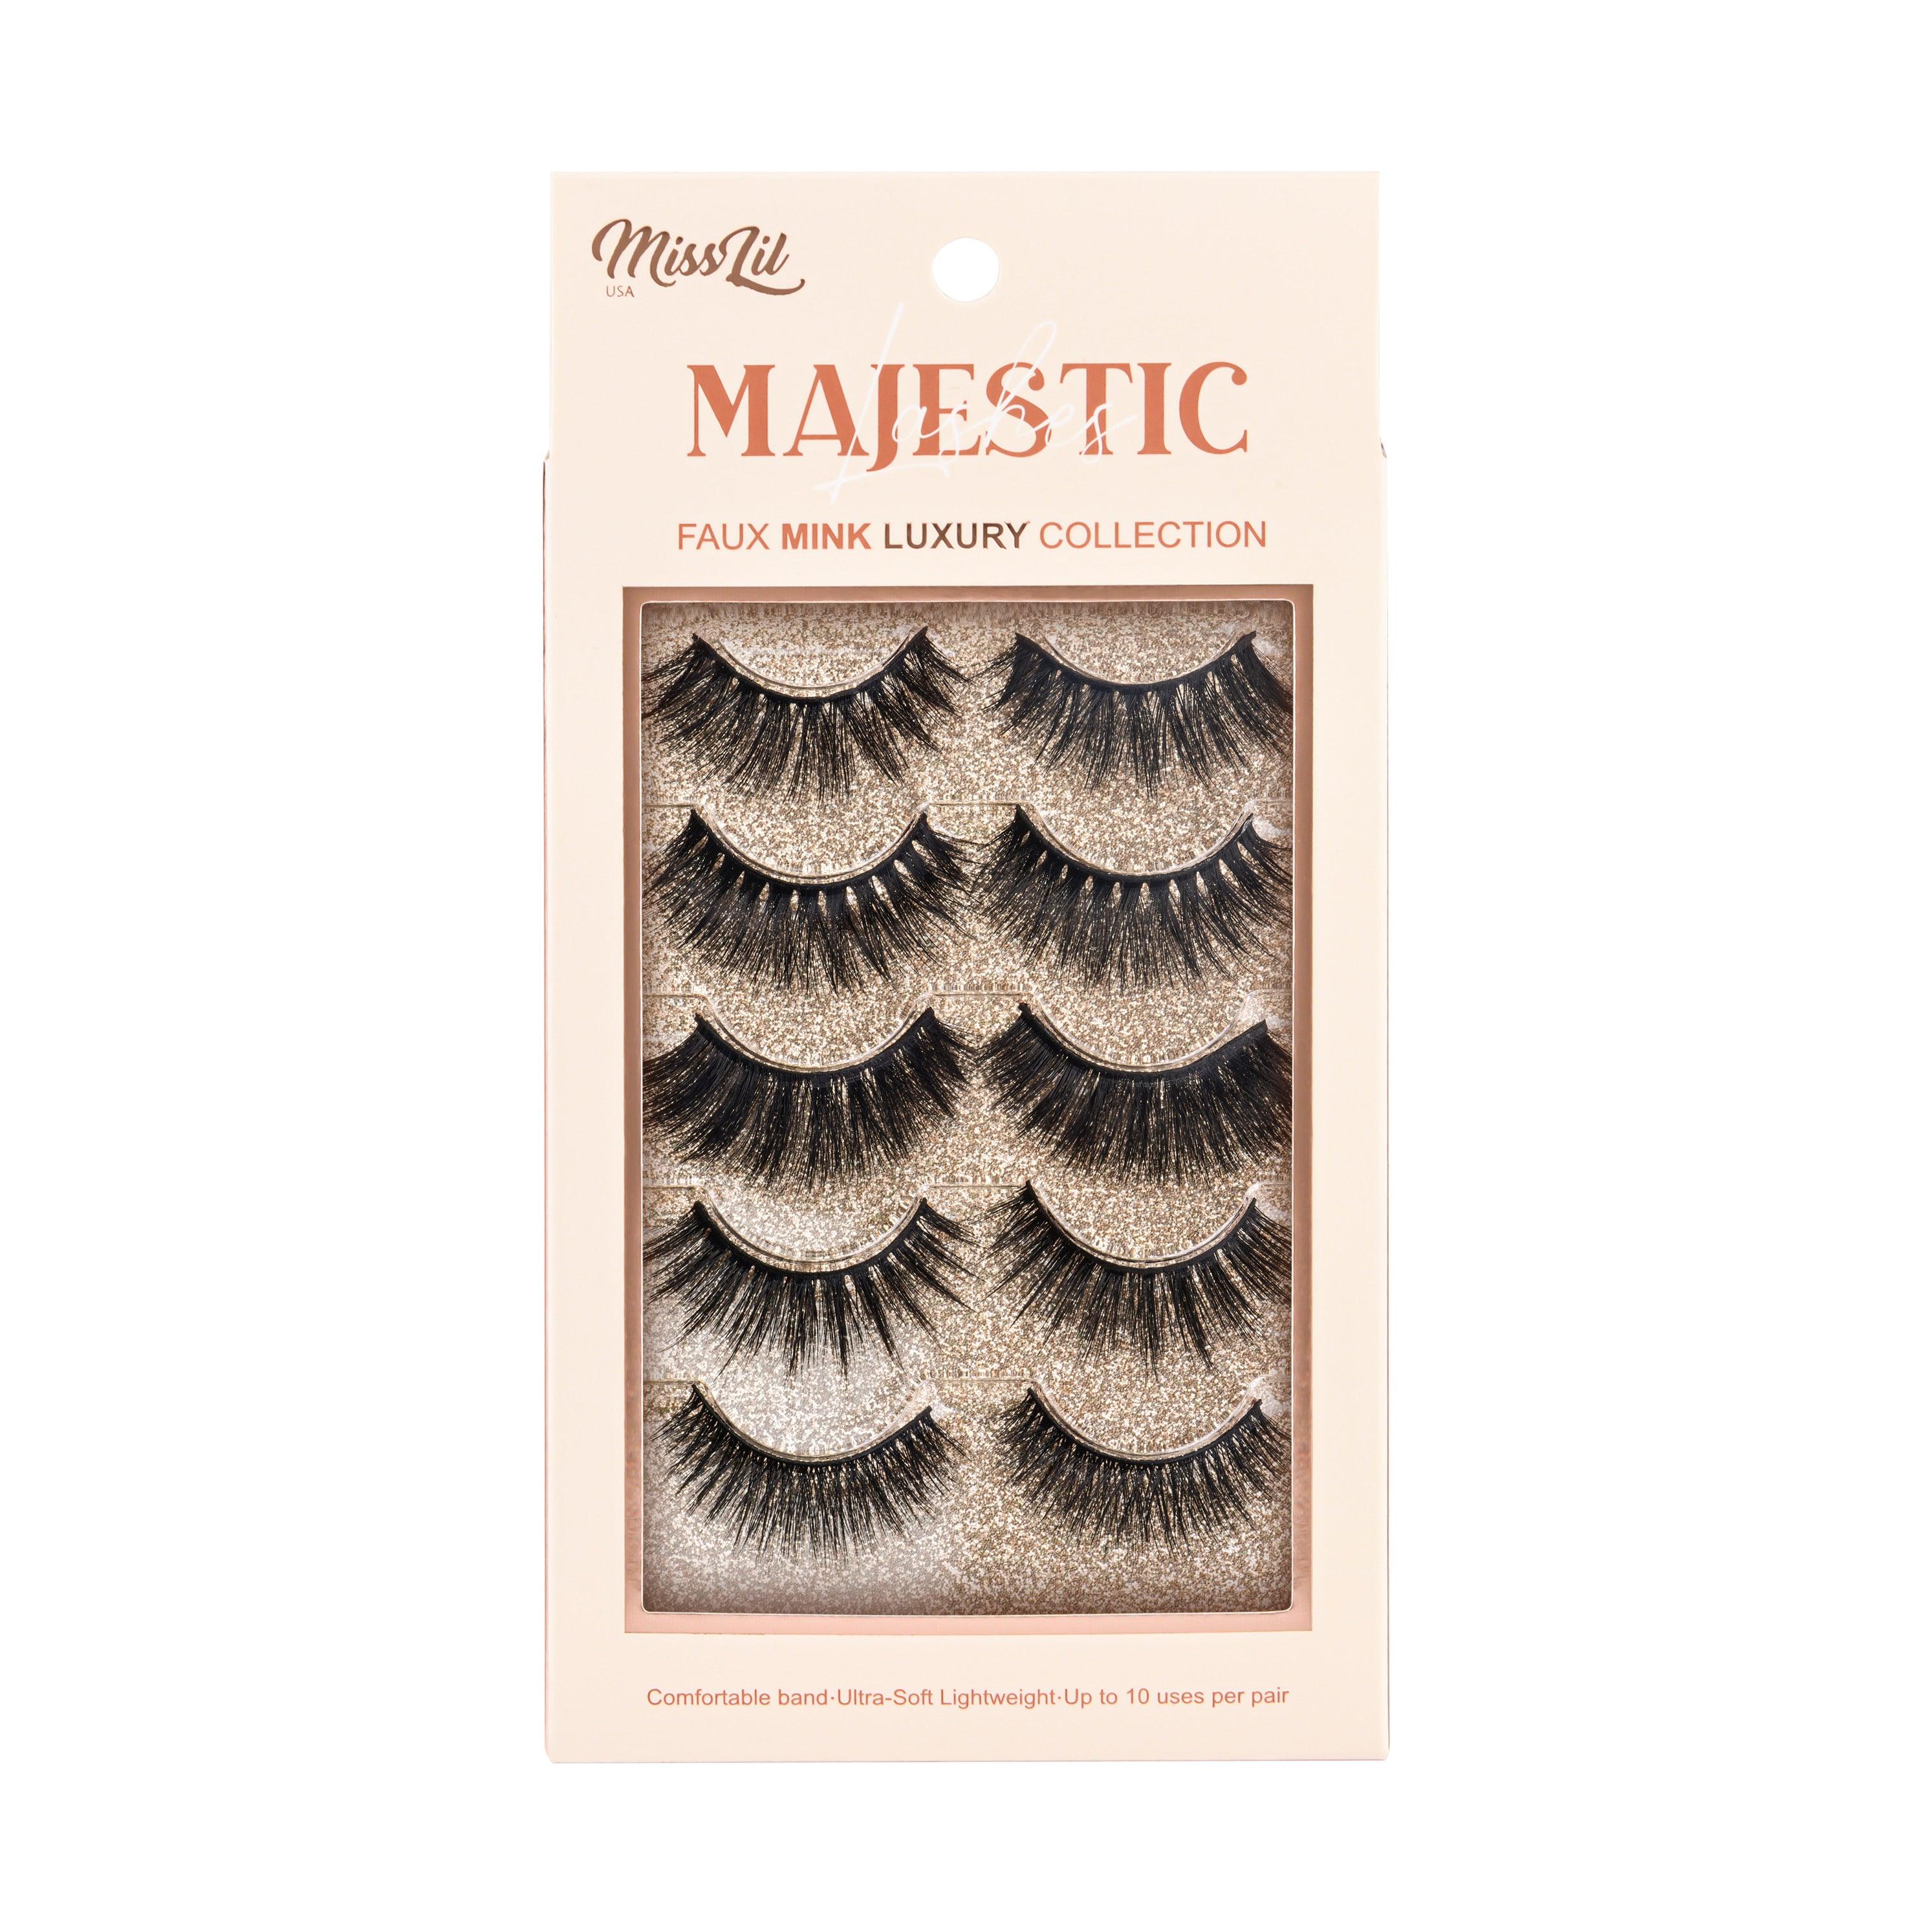 5 Pairs Majestic Lashes #7 (Pack of 6) - Miss Lil USA Wholesale